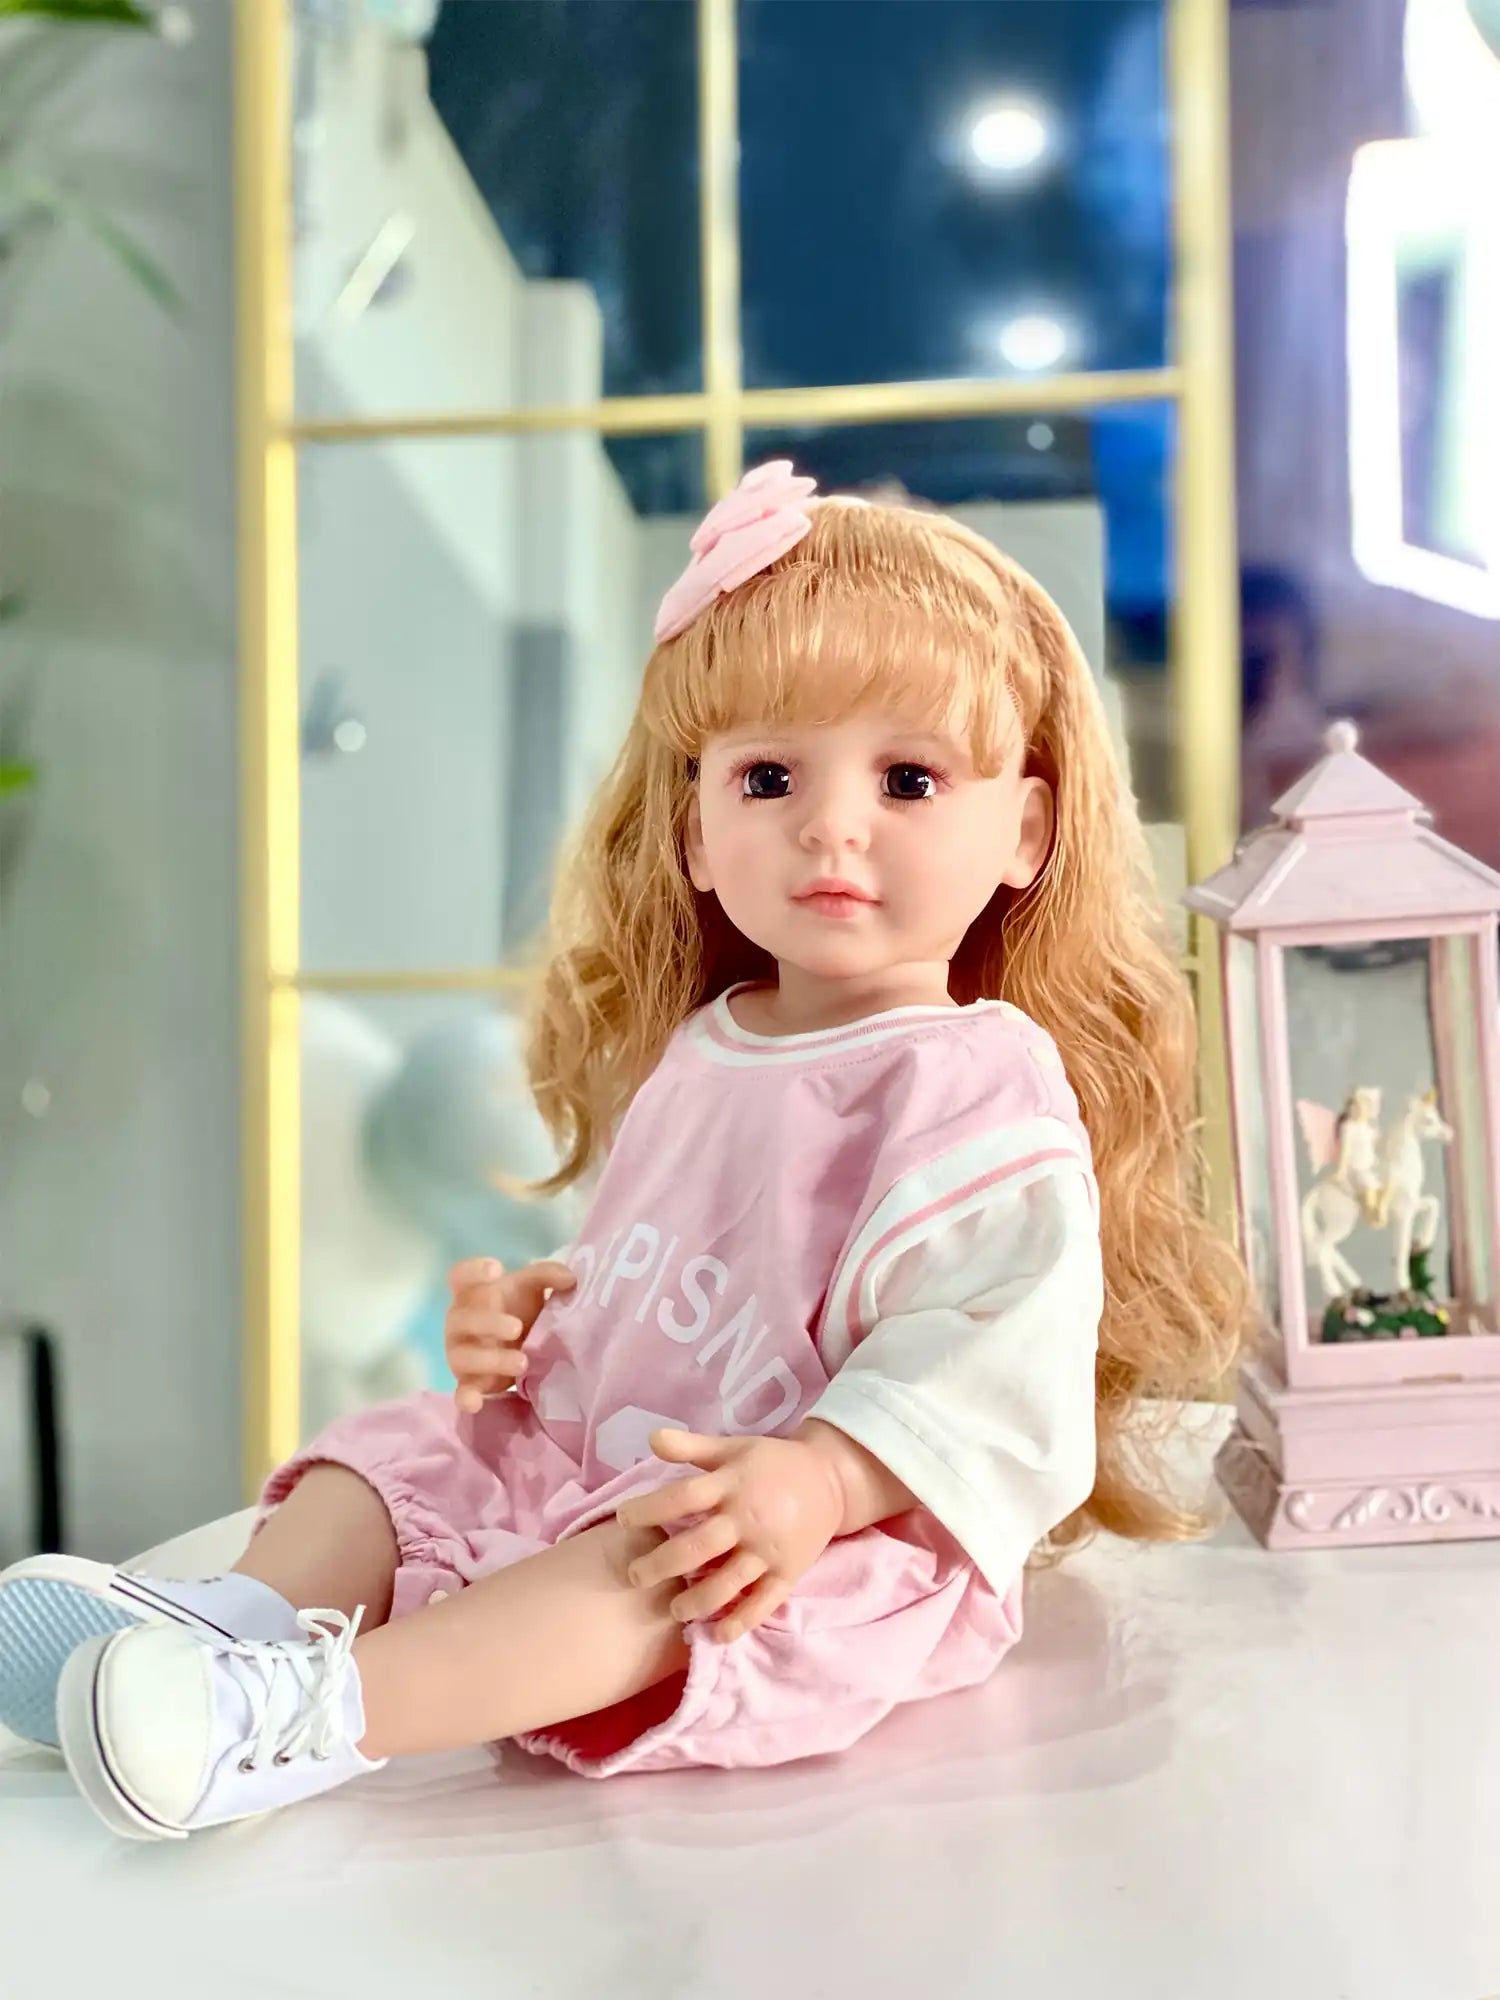 Toddler doll with a thoughtful gaze, adorned with a soft pink bow, dressed in a sporty outfit, celebrating a cozy holiday season.